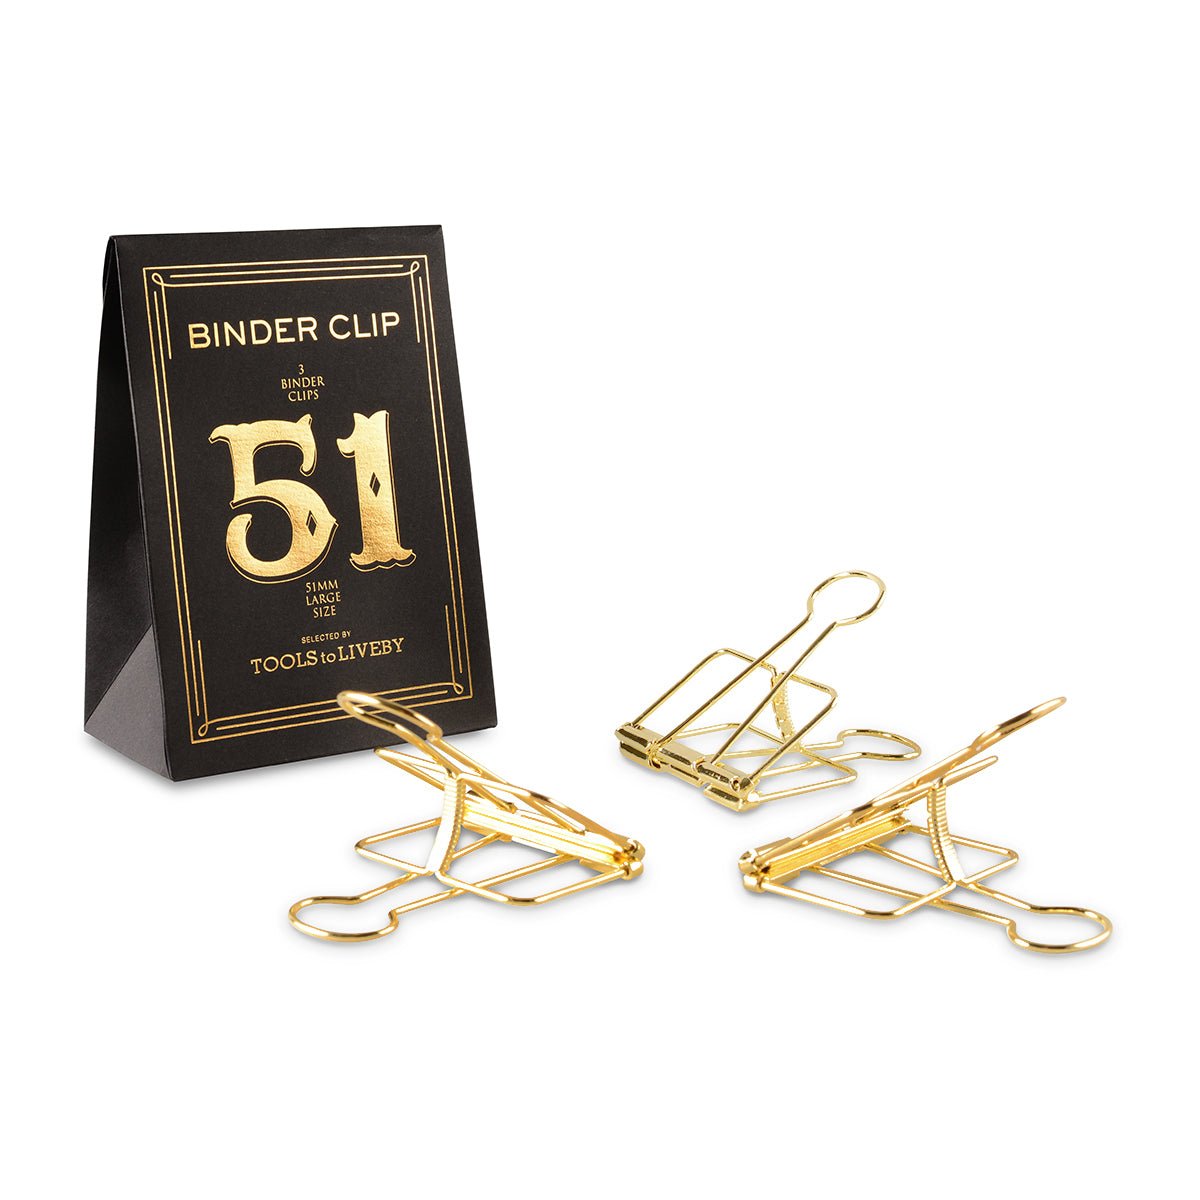 TOOLS to LIVEBY Binder Clips 51mm Golden 